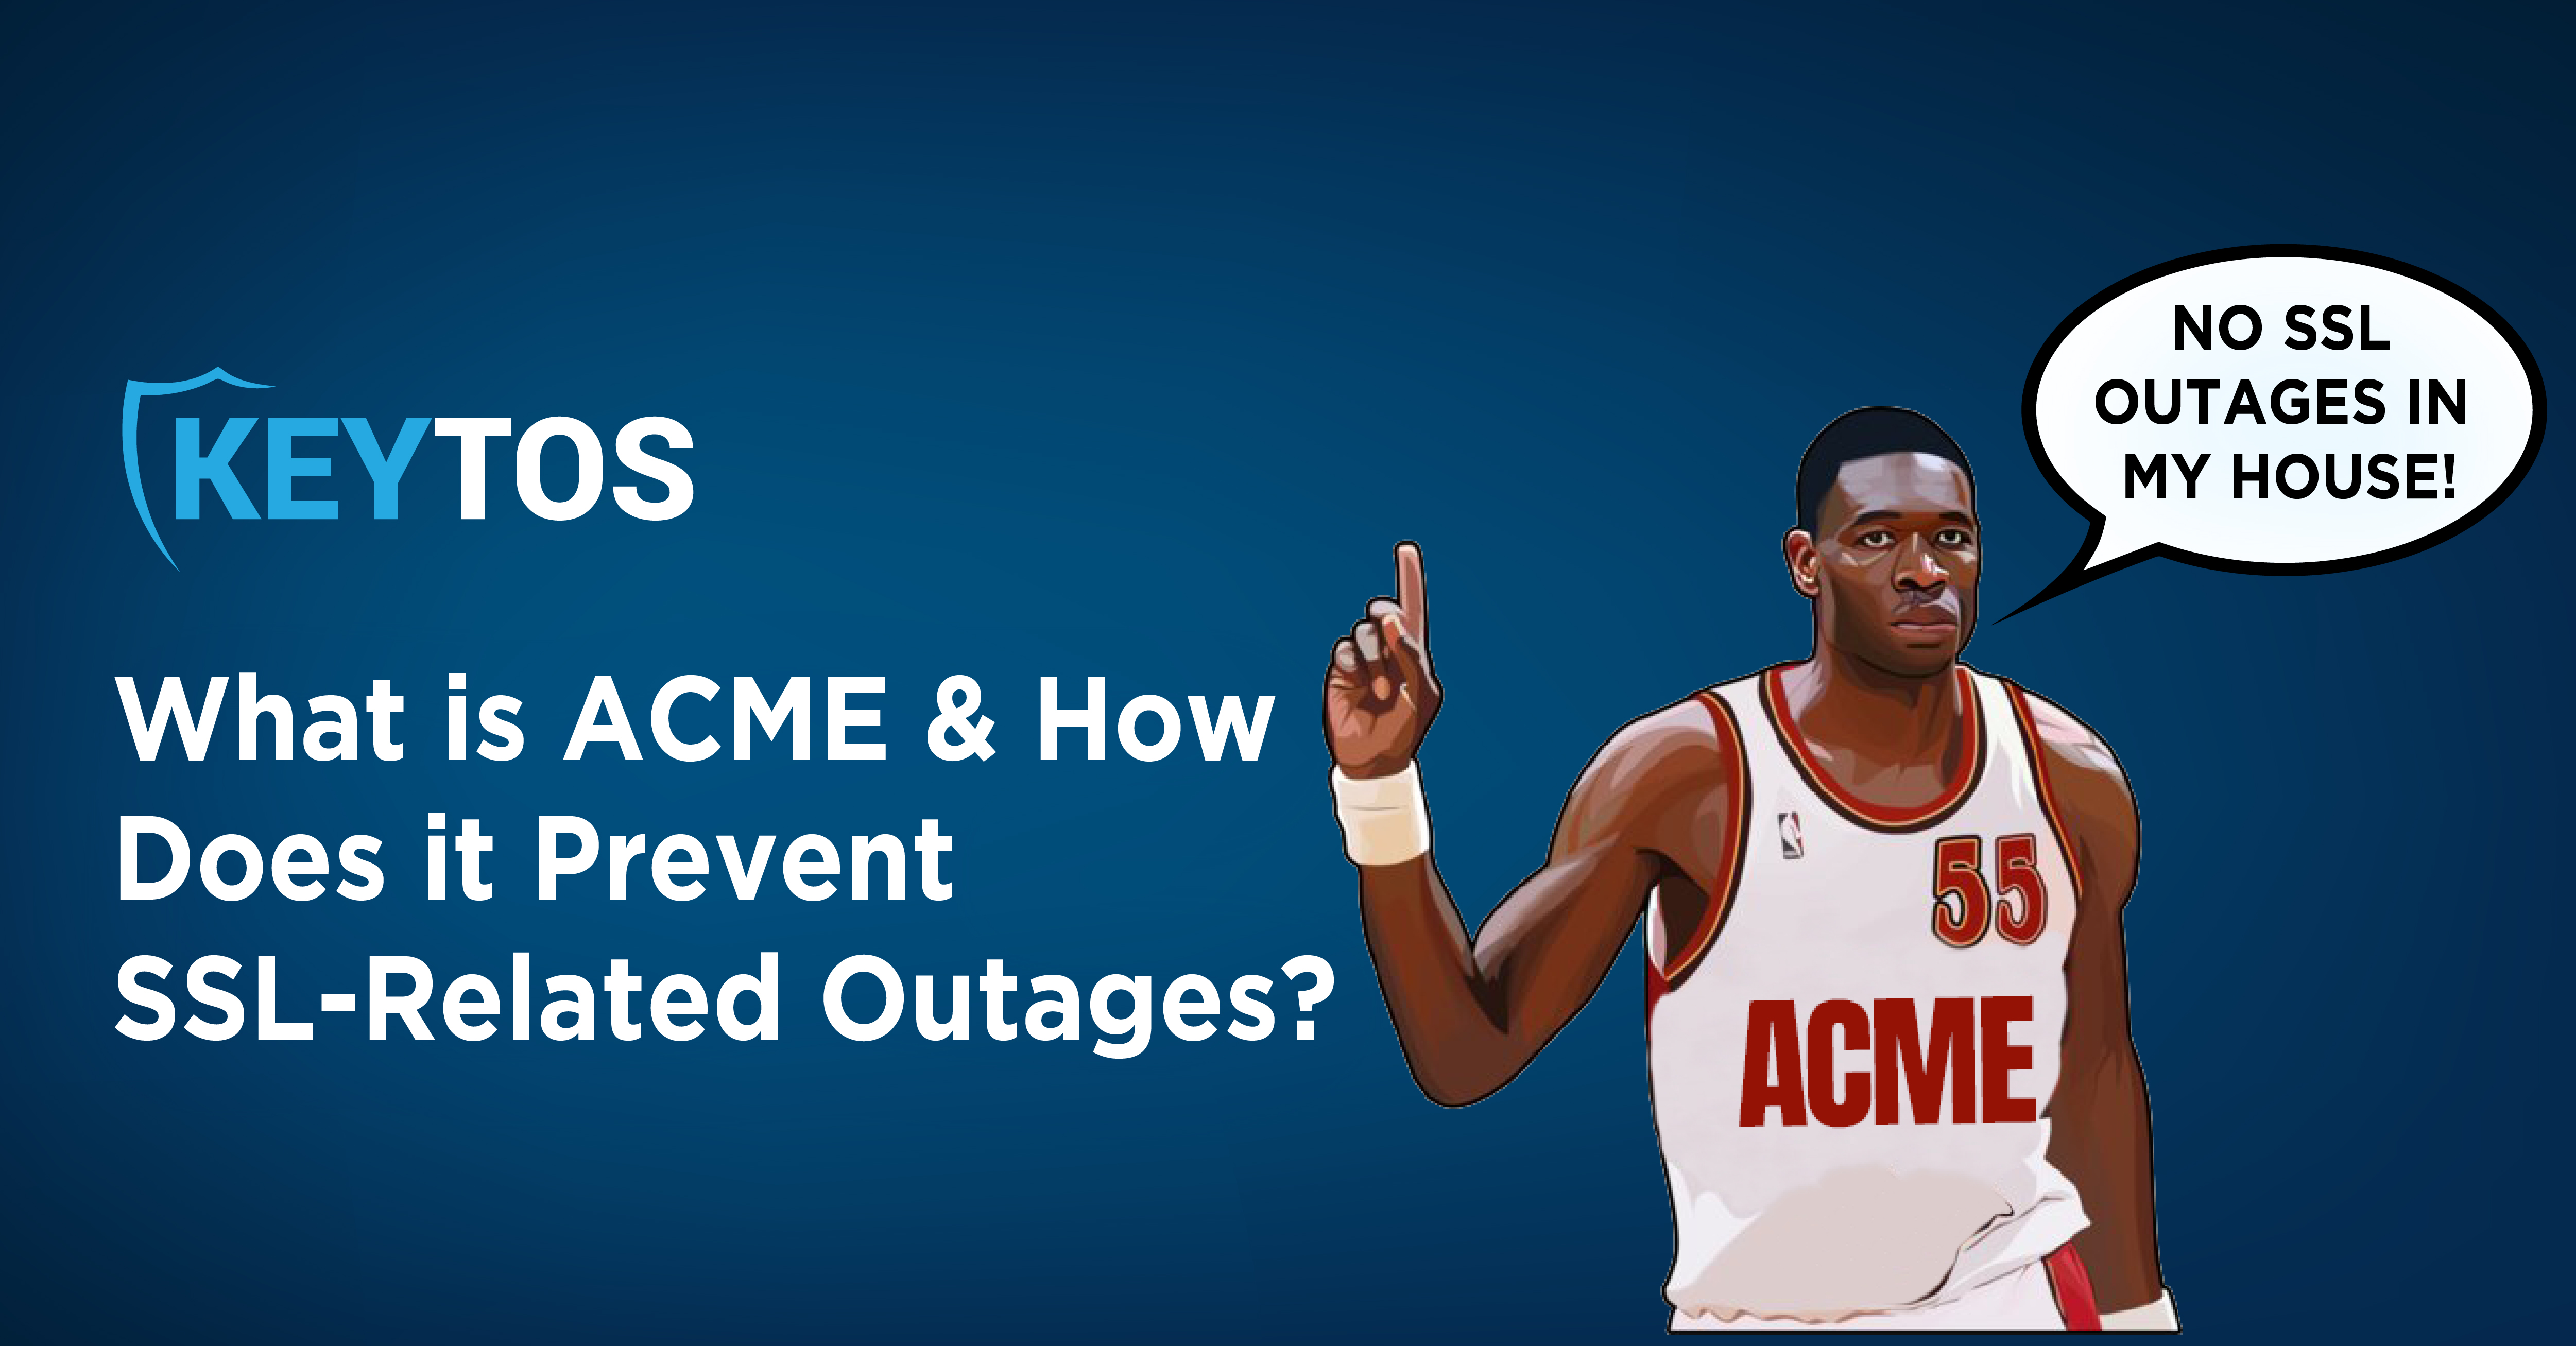 What is ACME? How Does ACME Prevent SSL Related Outages?